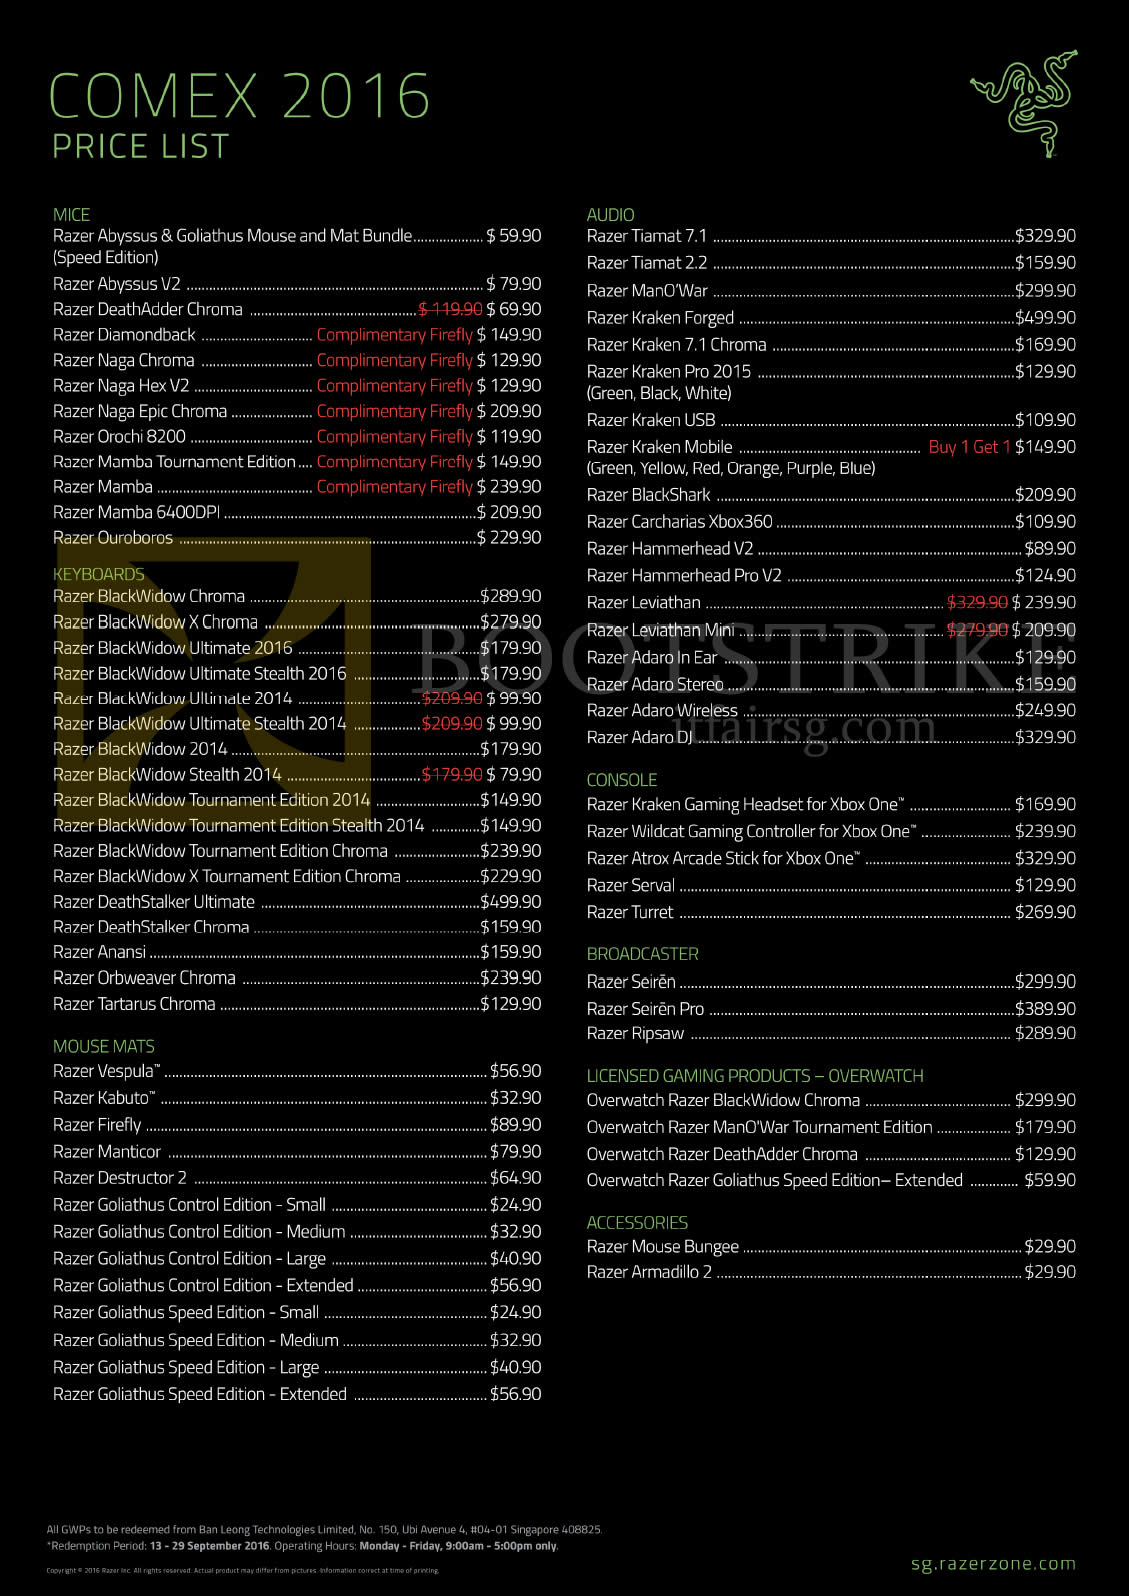 COMEX 2016 price list image brochure of Razer Mouse, Audio, Keyboards, Console, Broadcaster, Mousemats, Gaming Products, Accessories, Overwatch, BlackWidow, Goliathus, Naga, Mamba